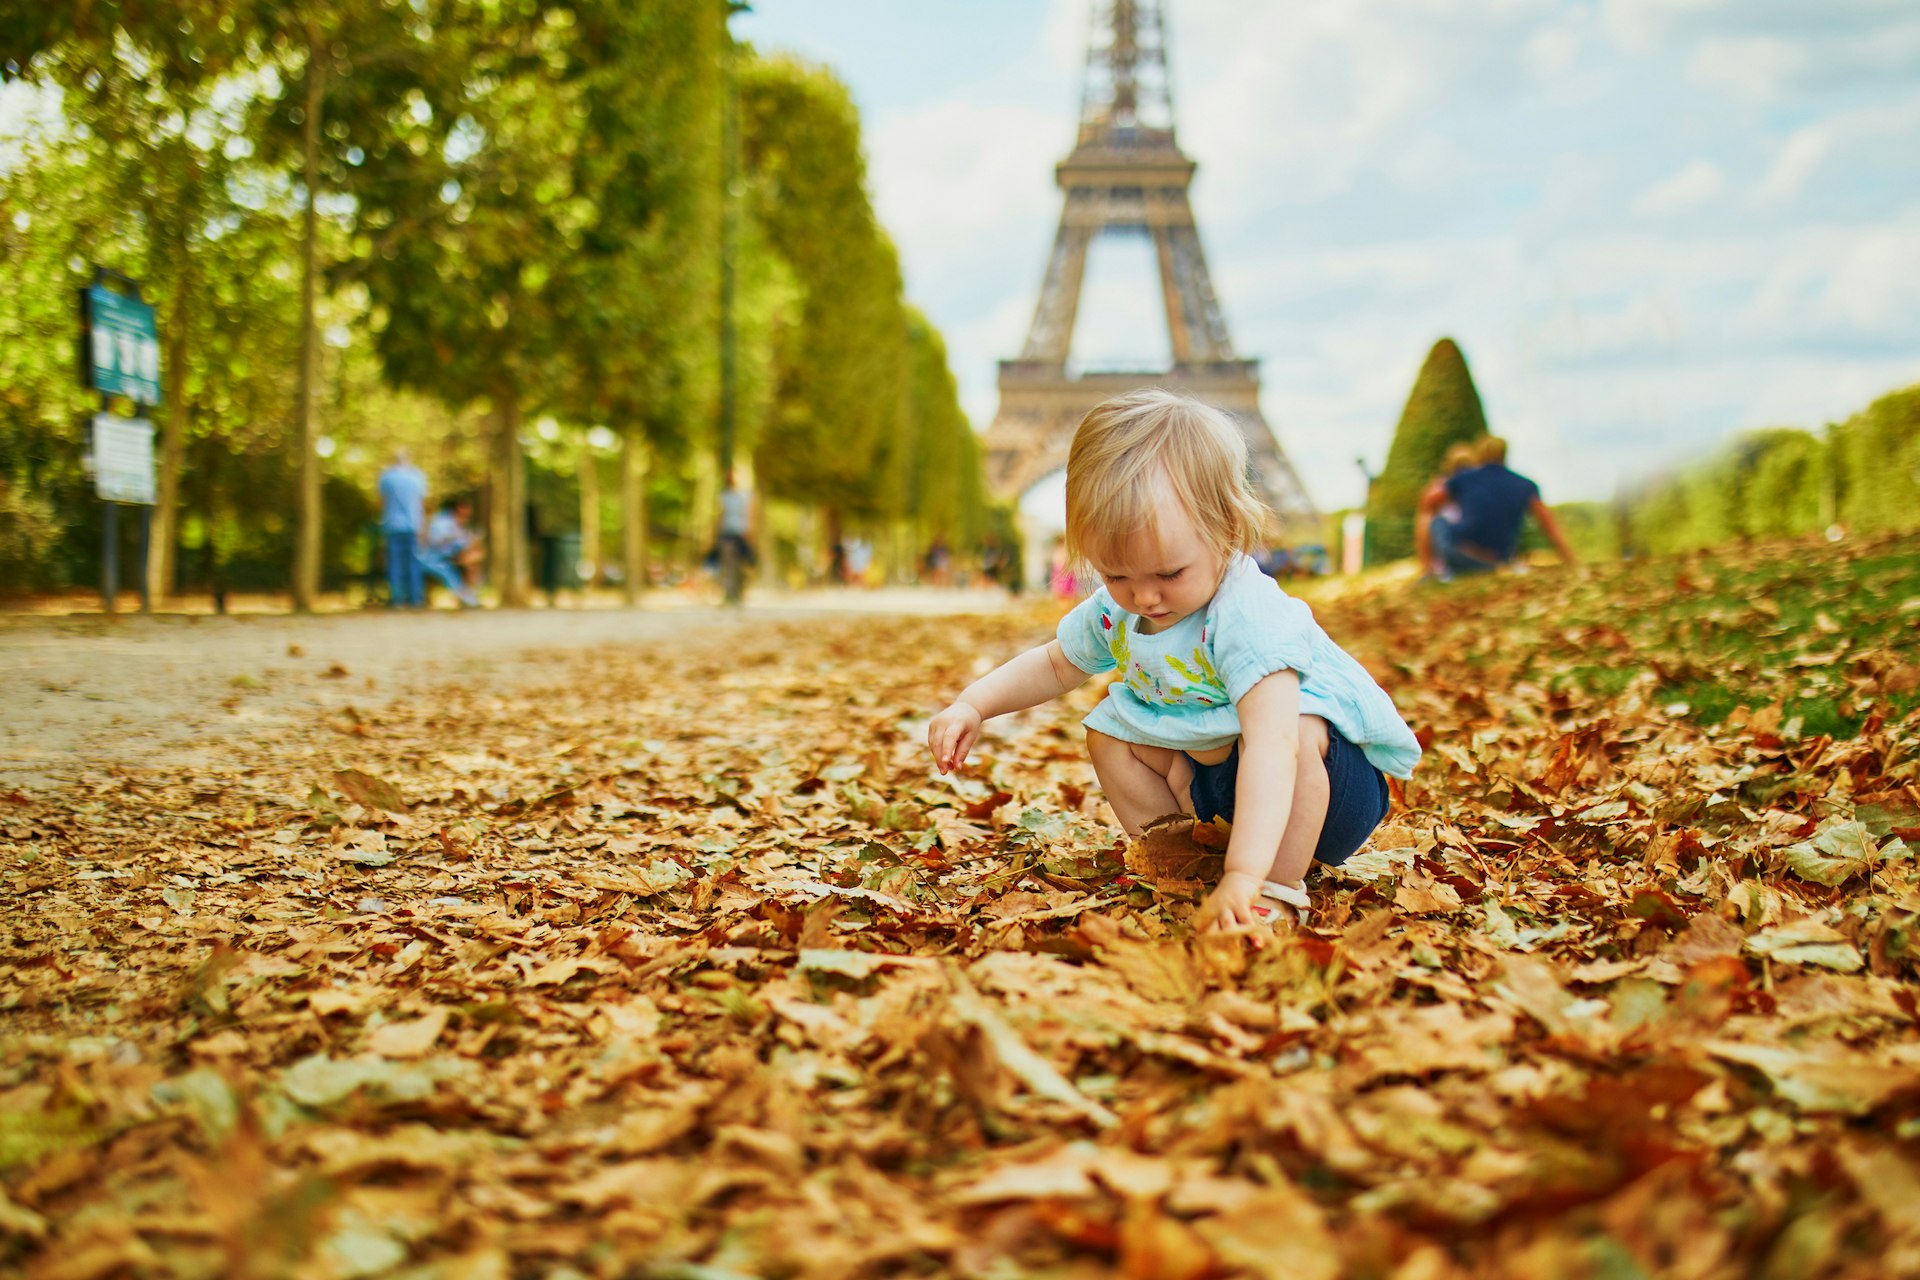 An adorable blond toddler girl plays with fallen autumn leaves near the Eiffel Tower in Paris, France